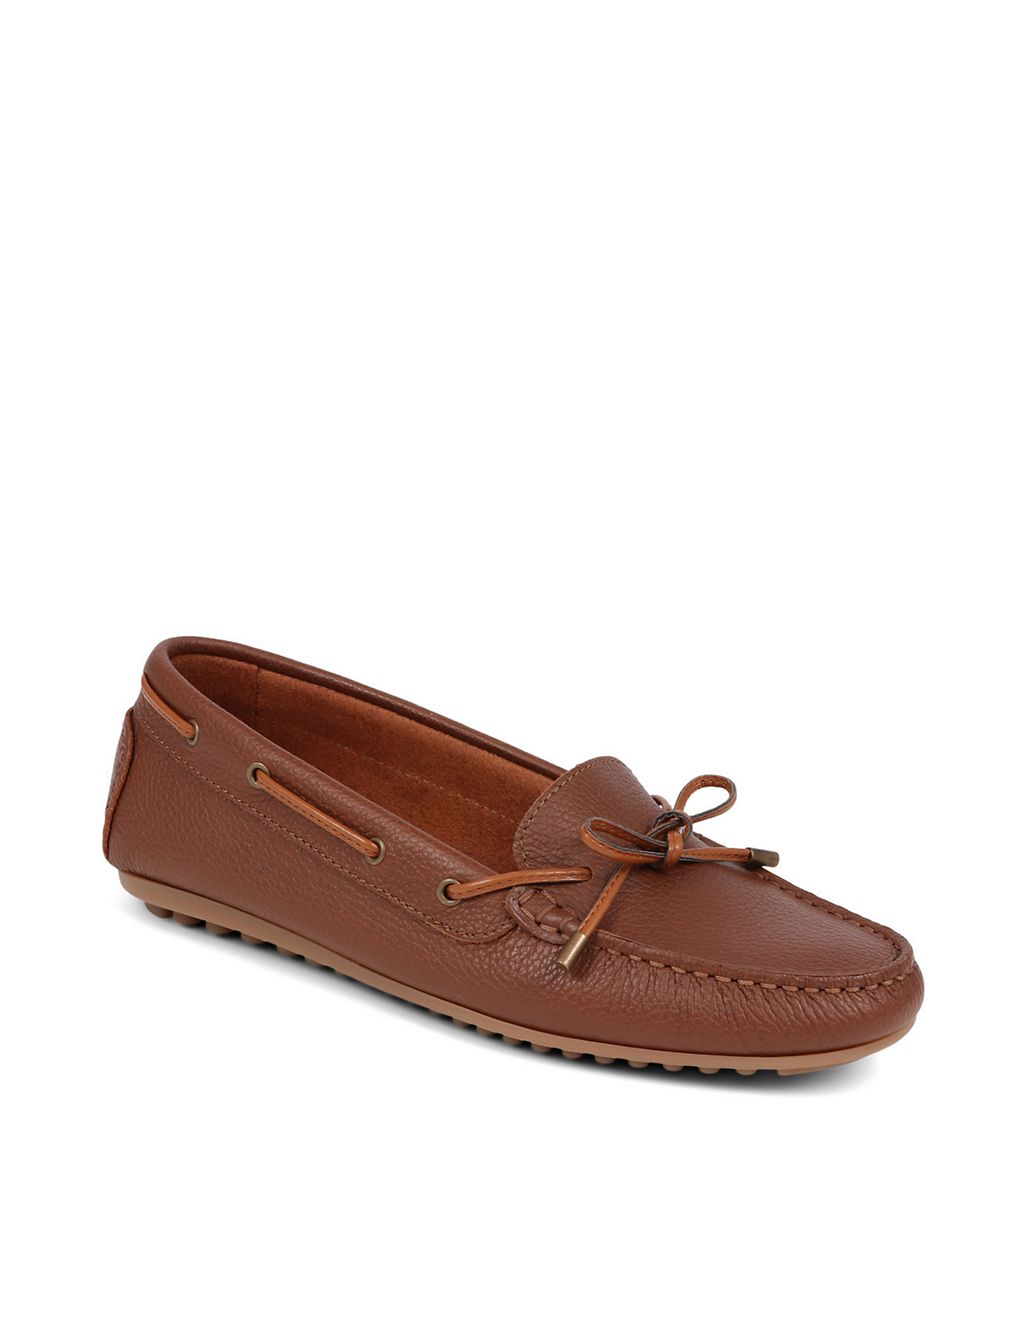 Leather Bow Slip On Flat Boat Shoes 6 of 7